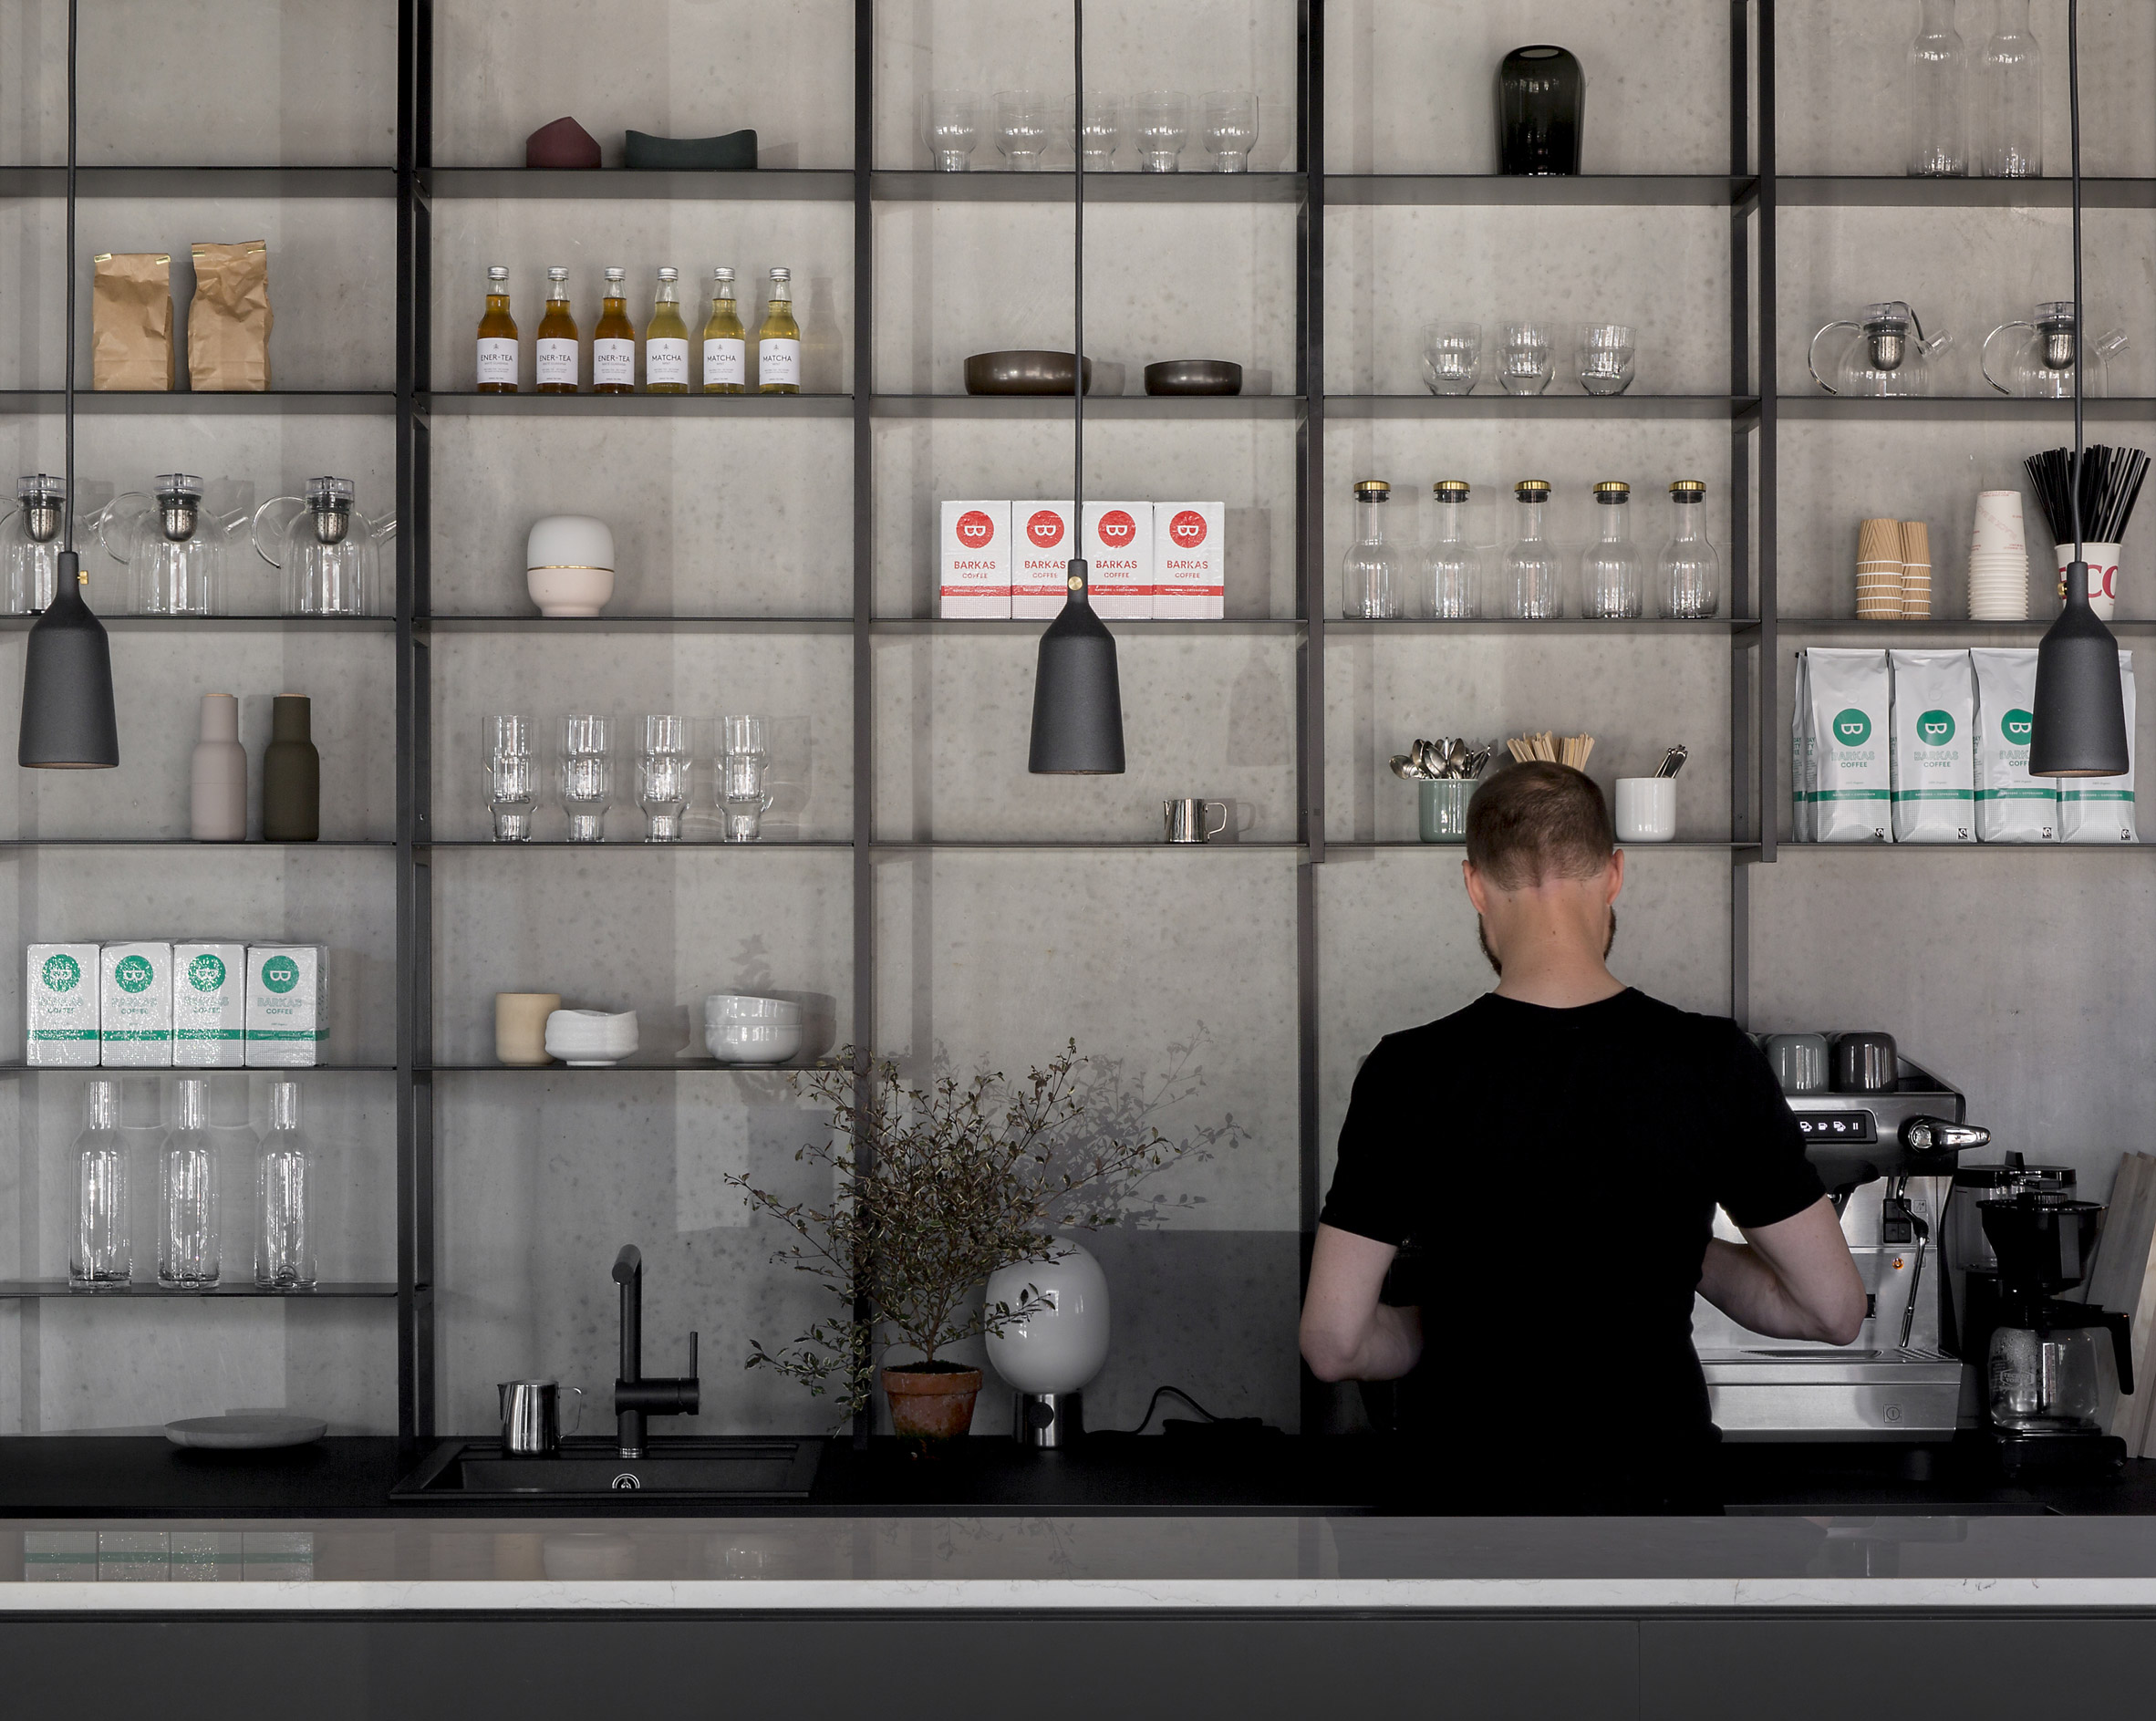 Menu Space showroom, a collaborative project with Norm Architects, is finished for Danish design company MENU